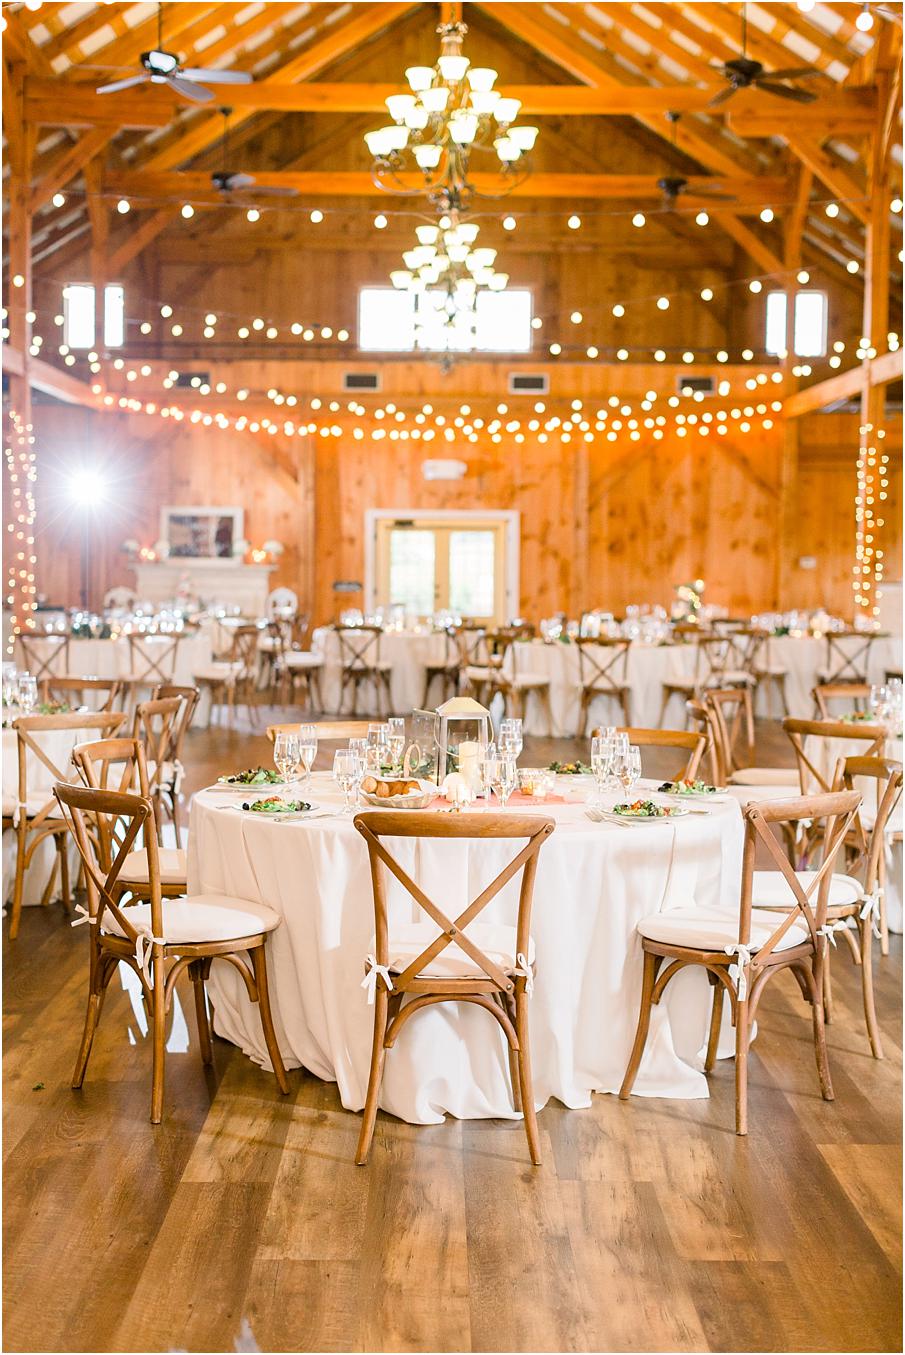 Shadow creek's barn reception layout with white linens, wood cross back chairs, and lantern center pieces